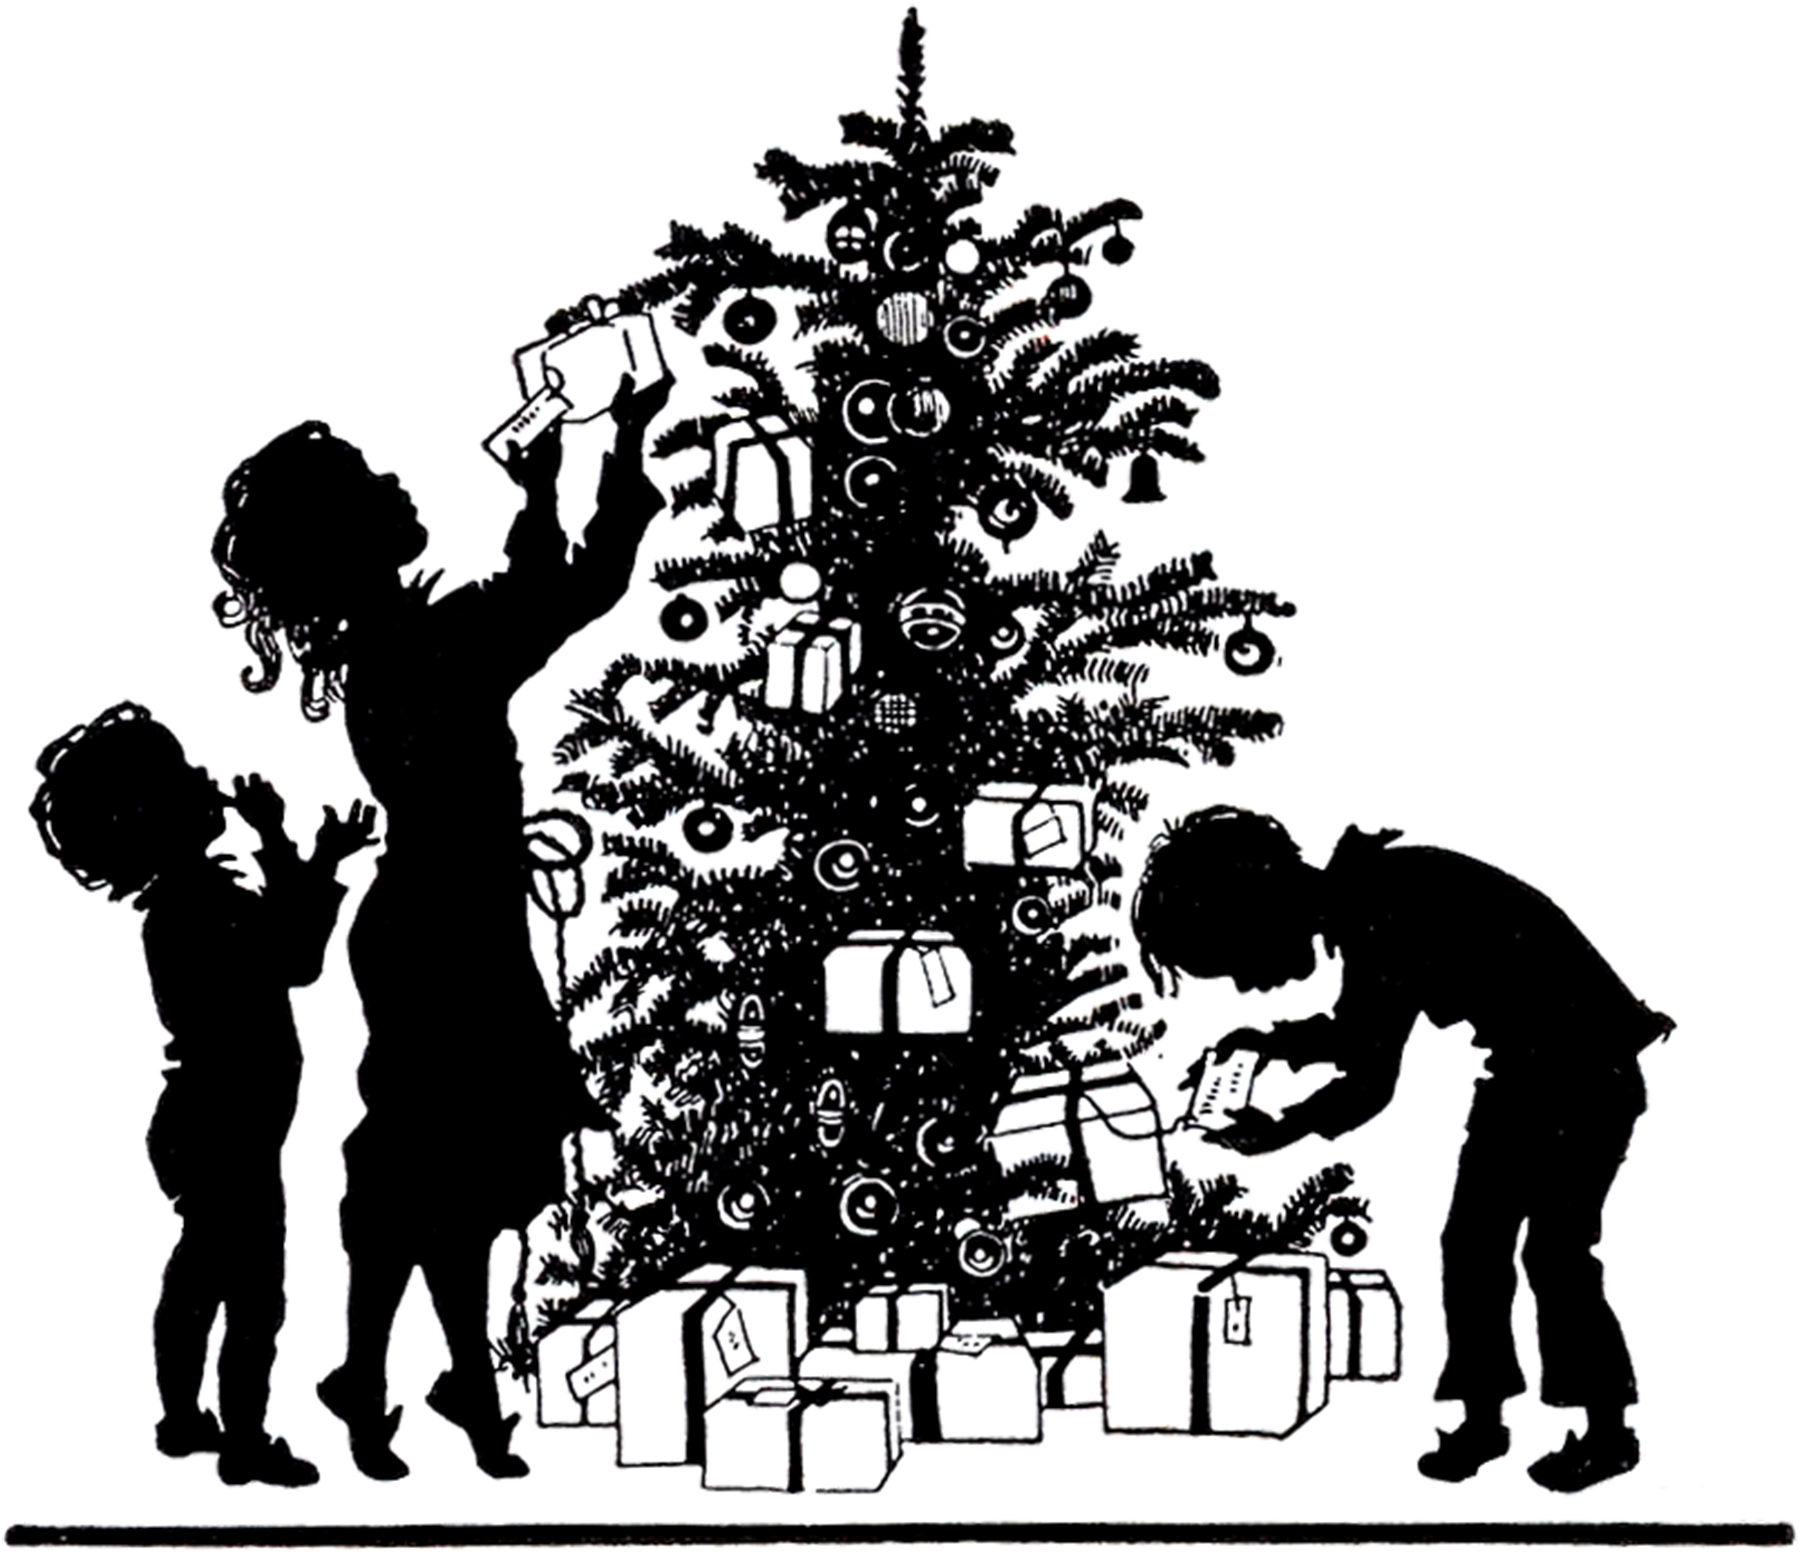 Christmas Morning Silhouette Image! - The Graphics Fairy